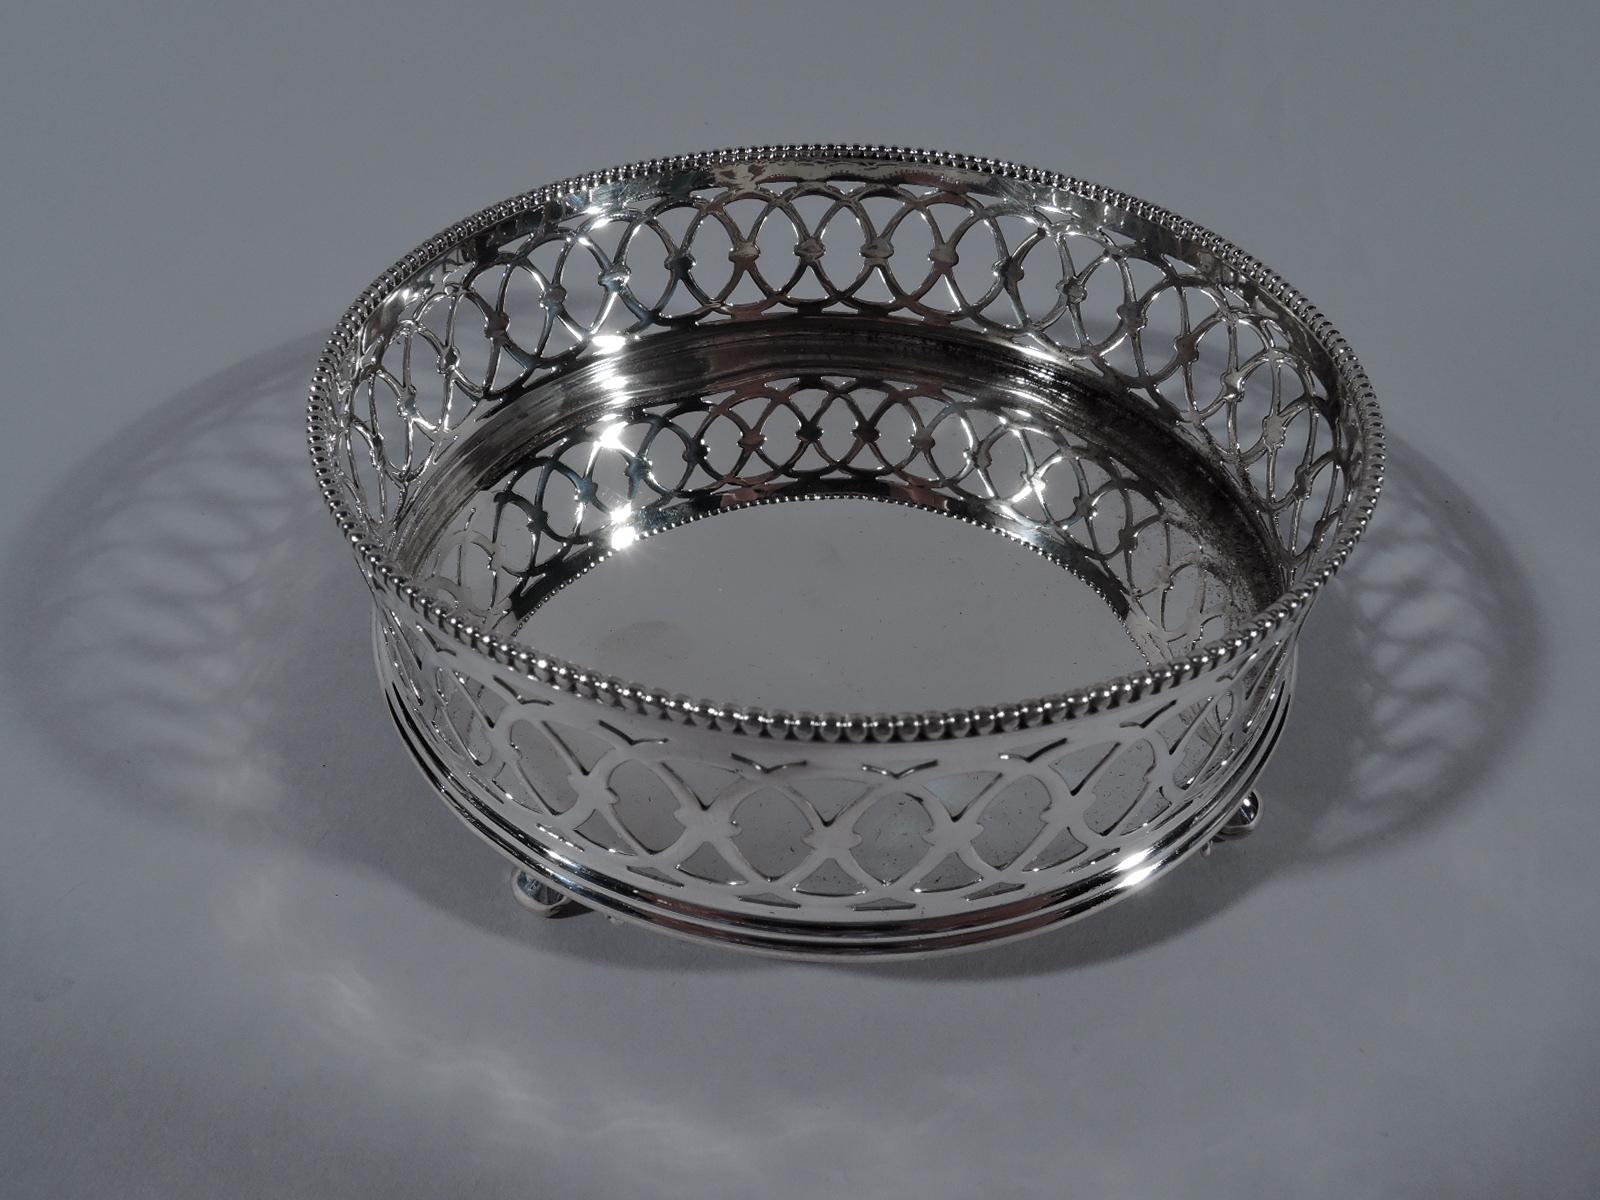 Pair of Edwardian sterling silver wine bottle coasters. Made by Gorham in Providence in 1896. Each: Round with gallery sides comprising pierced interlaced circles, and beaded rim. Four leaf-mounted volute supports. Fully marked including date symbol